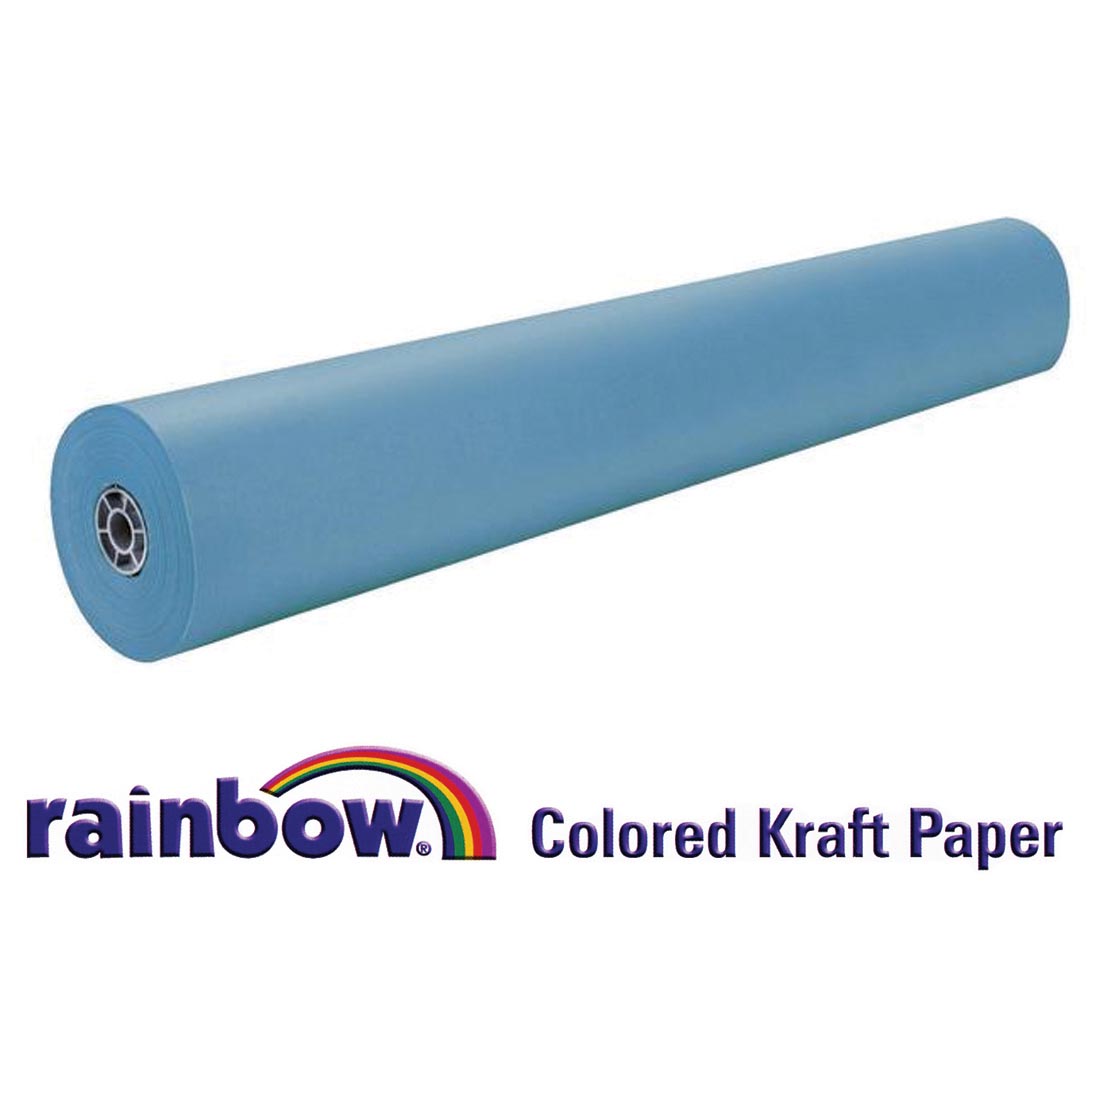 Roll of Bright Blue Paper with text Rainbow Colored Kraft Paper